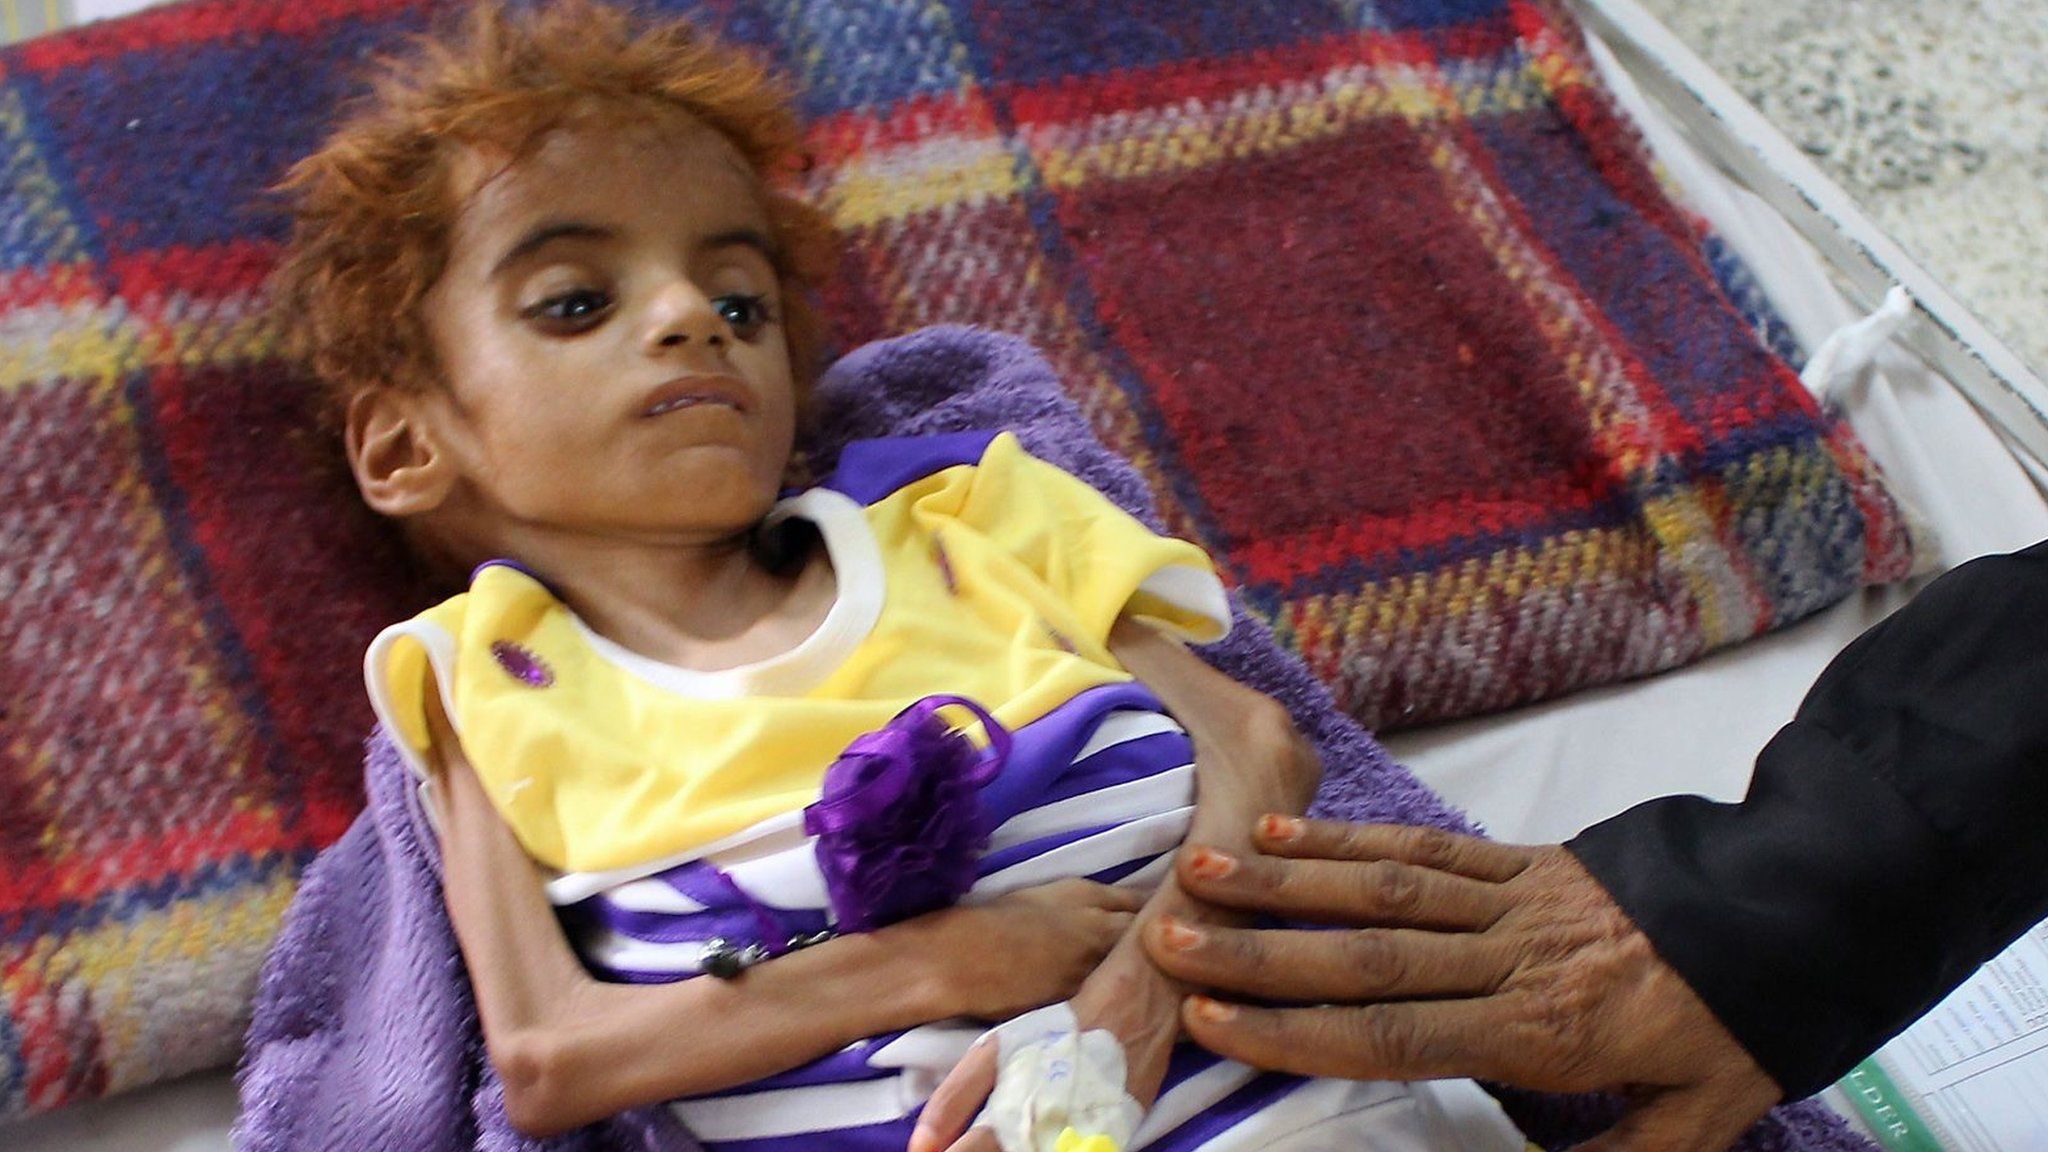 A Yemeni child suffering from malnutrition receives treatment at a hospital in Hajjah province (8 September 2018)